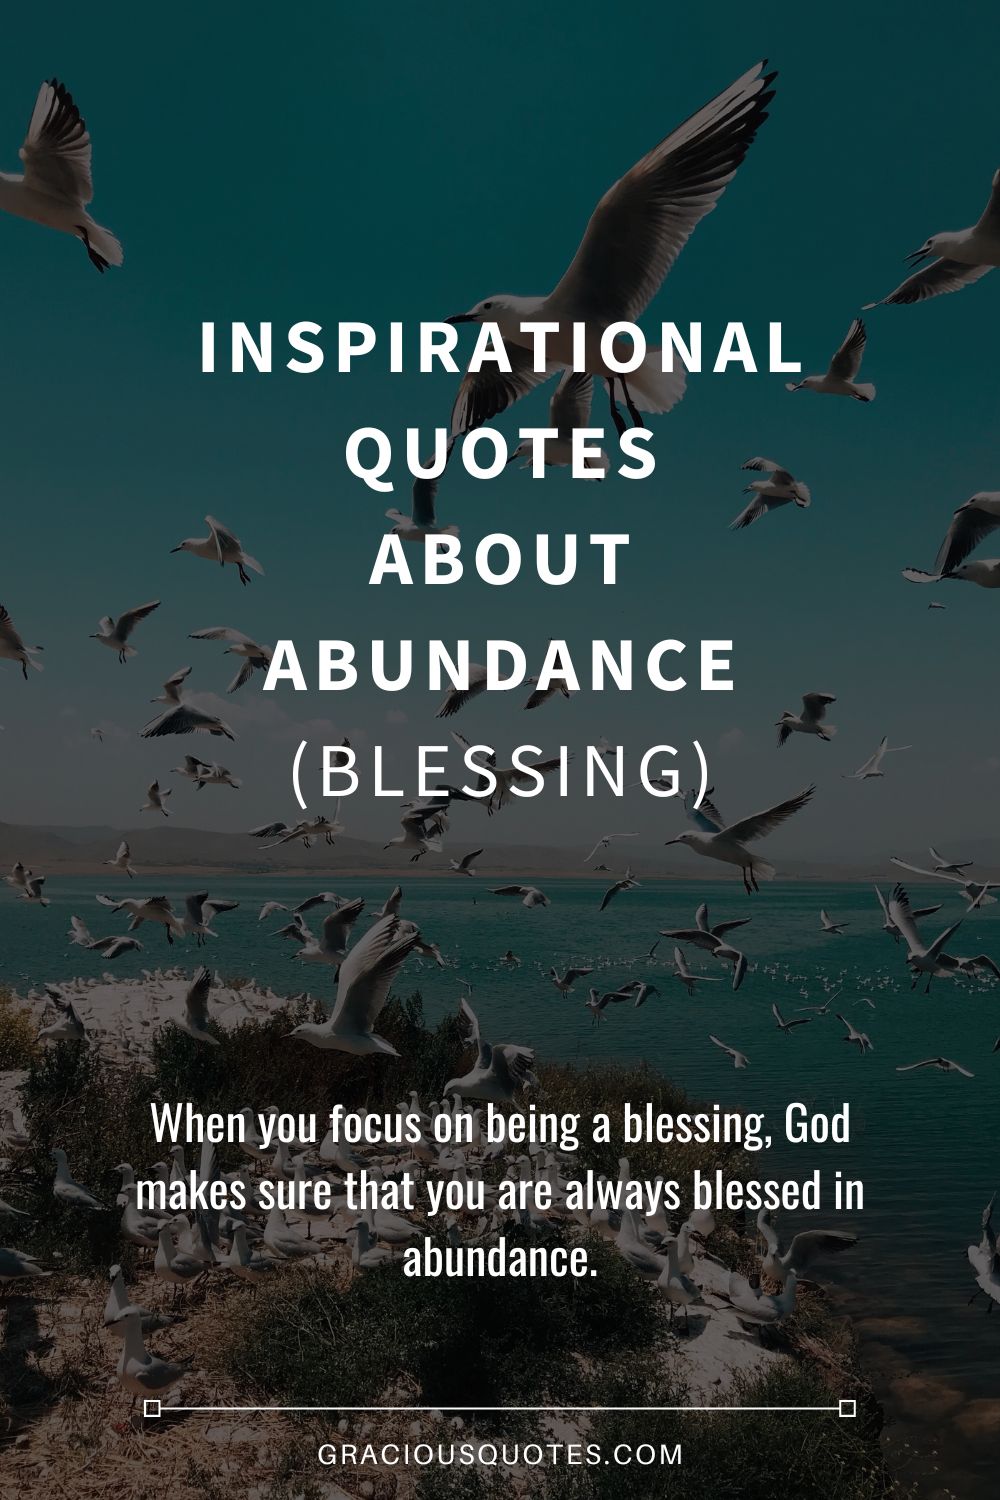 Inspirational Quotes About Abundance (BLESSING) - Gracious Quotes